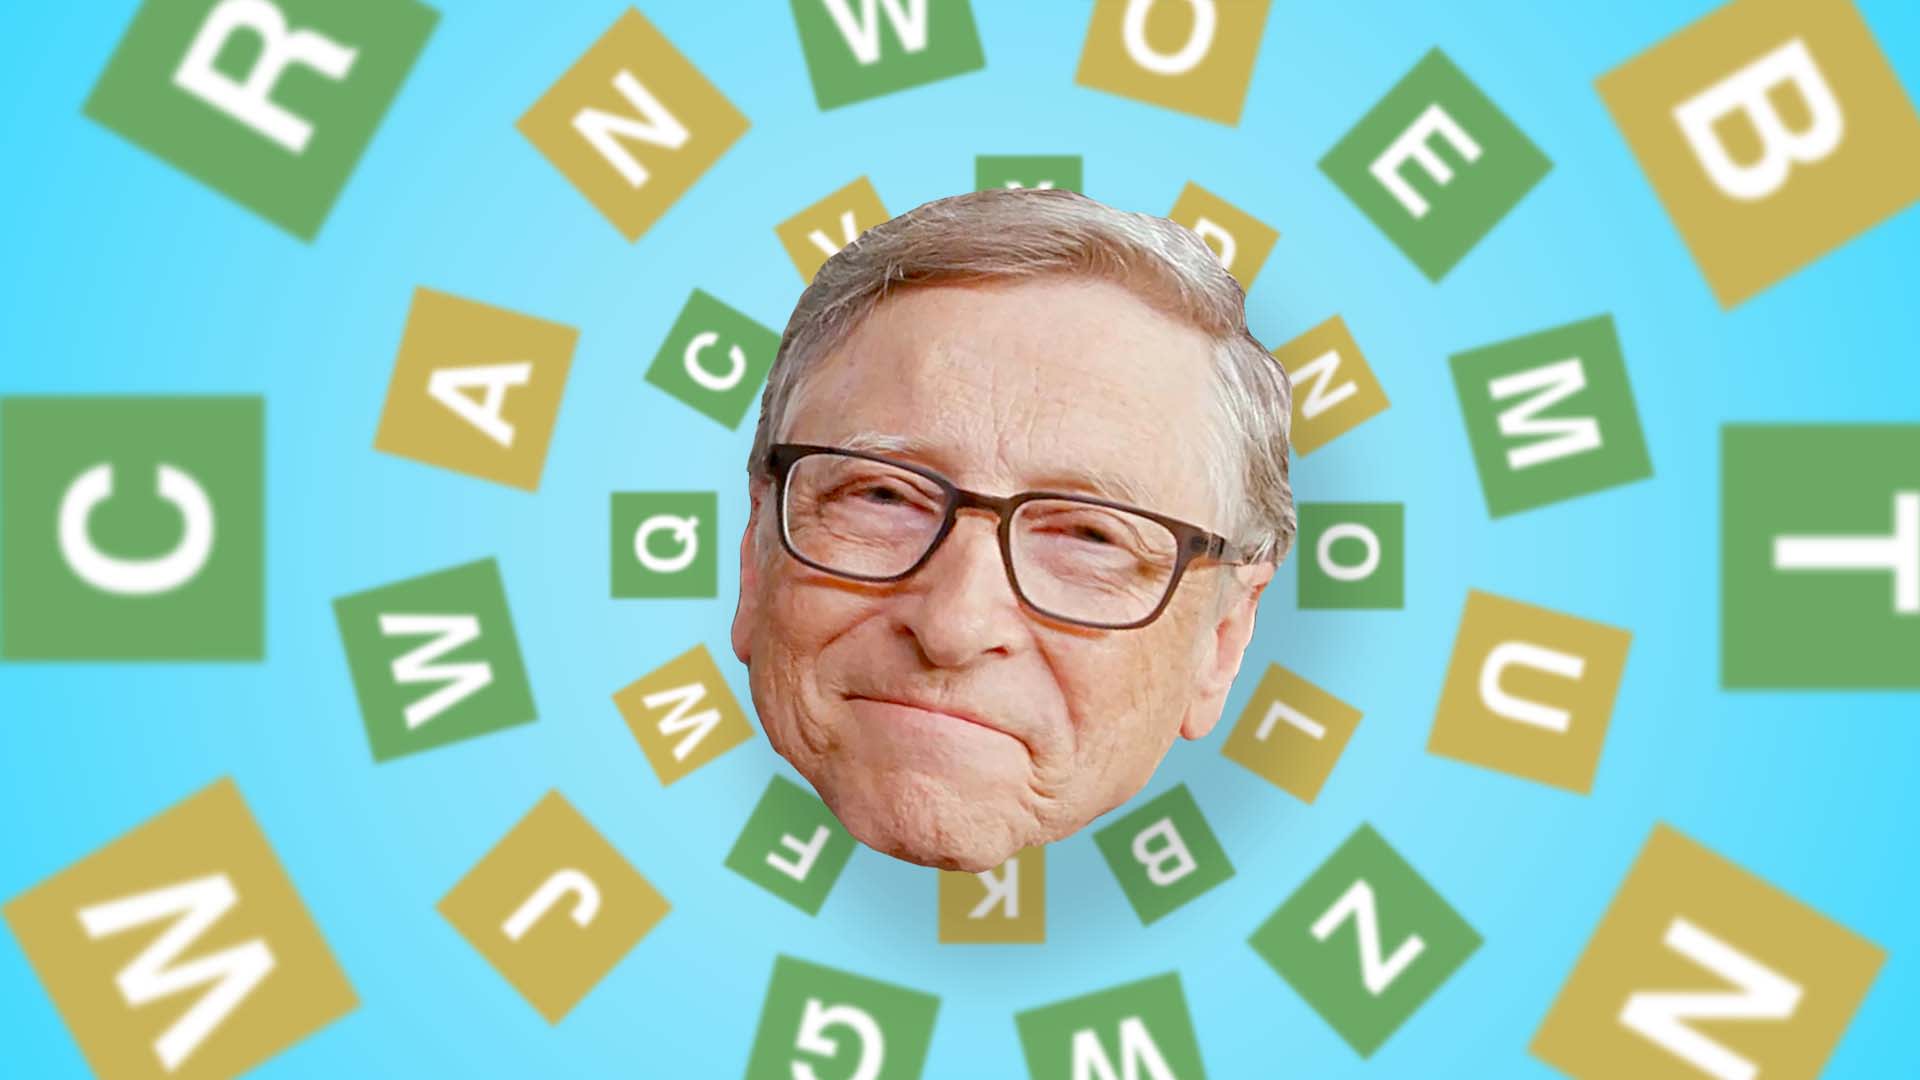 Bill Gates Plays Wordle Every Day. Then He Plays These 3 Games He Likes Just as Much